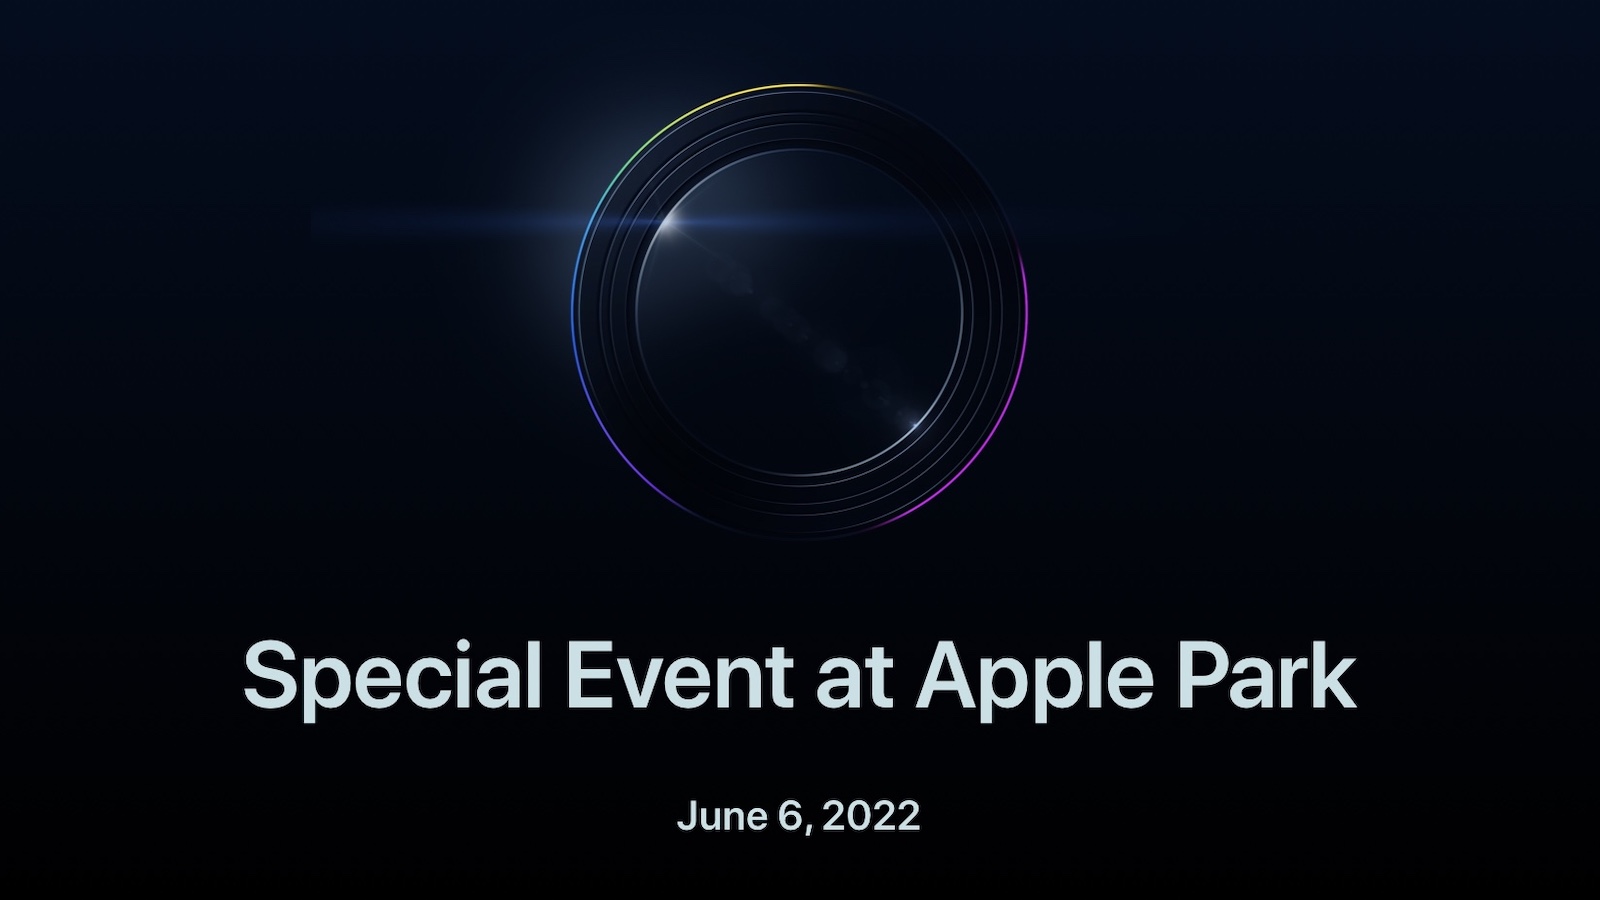 Apple Park WWDC Viewing Event for Developers to Include Special Tours of Caffe Macs, Fitness Center and More